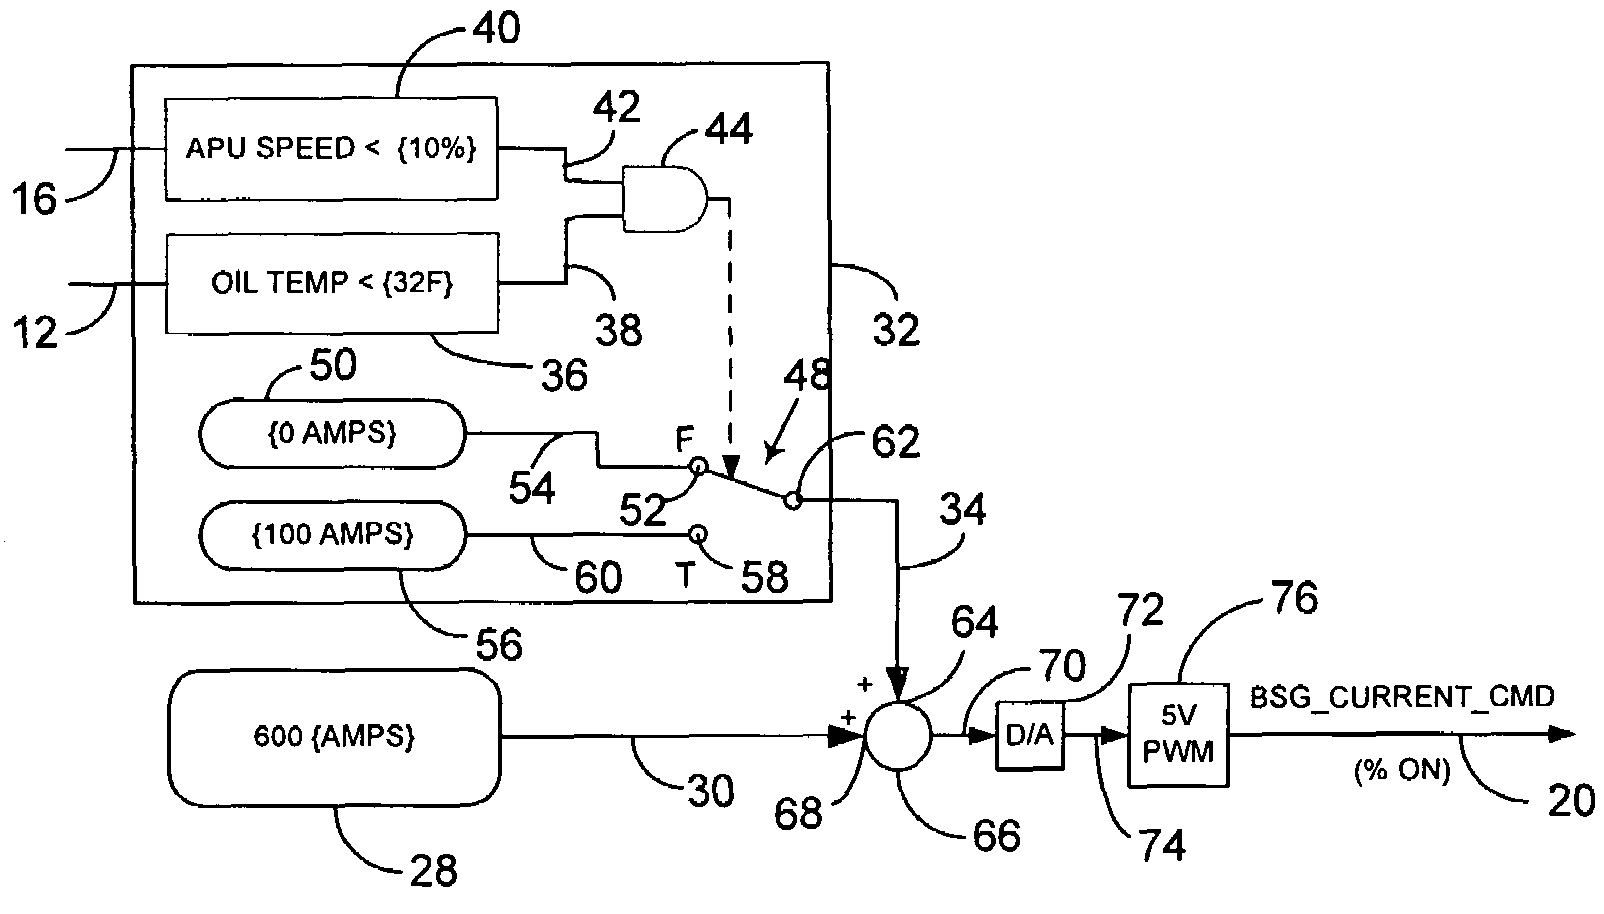 Torque control for starting system